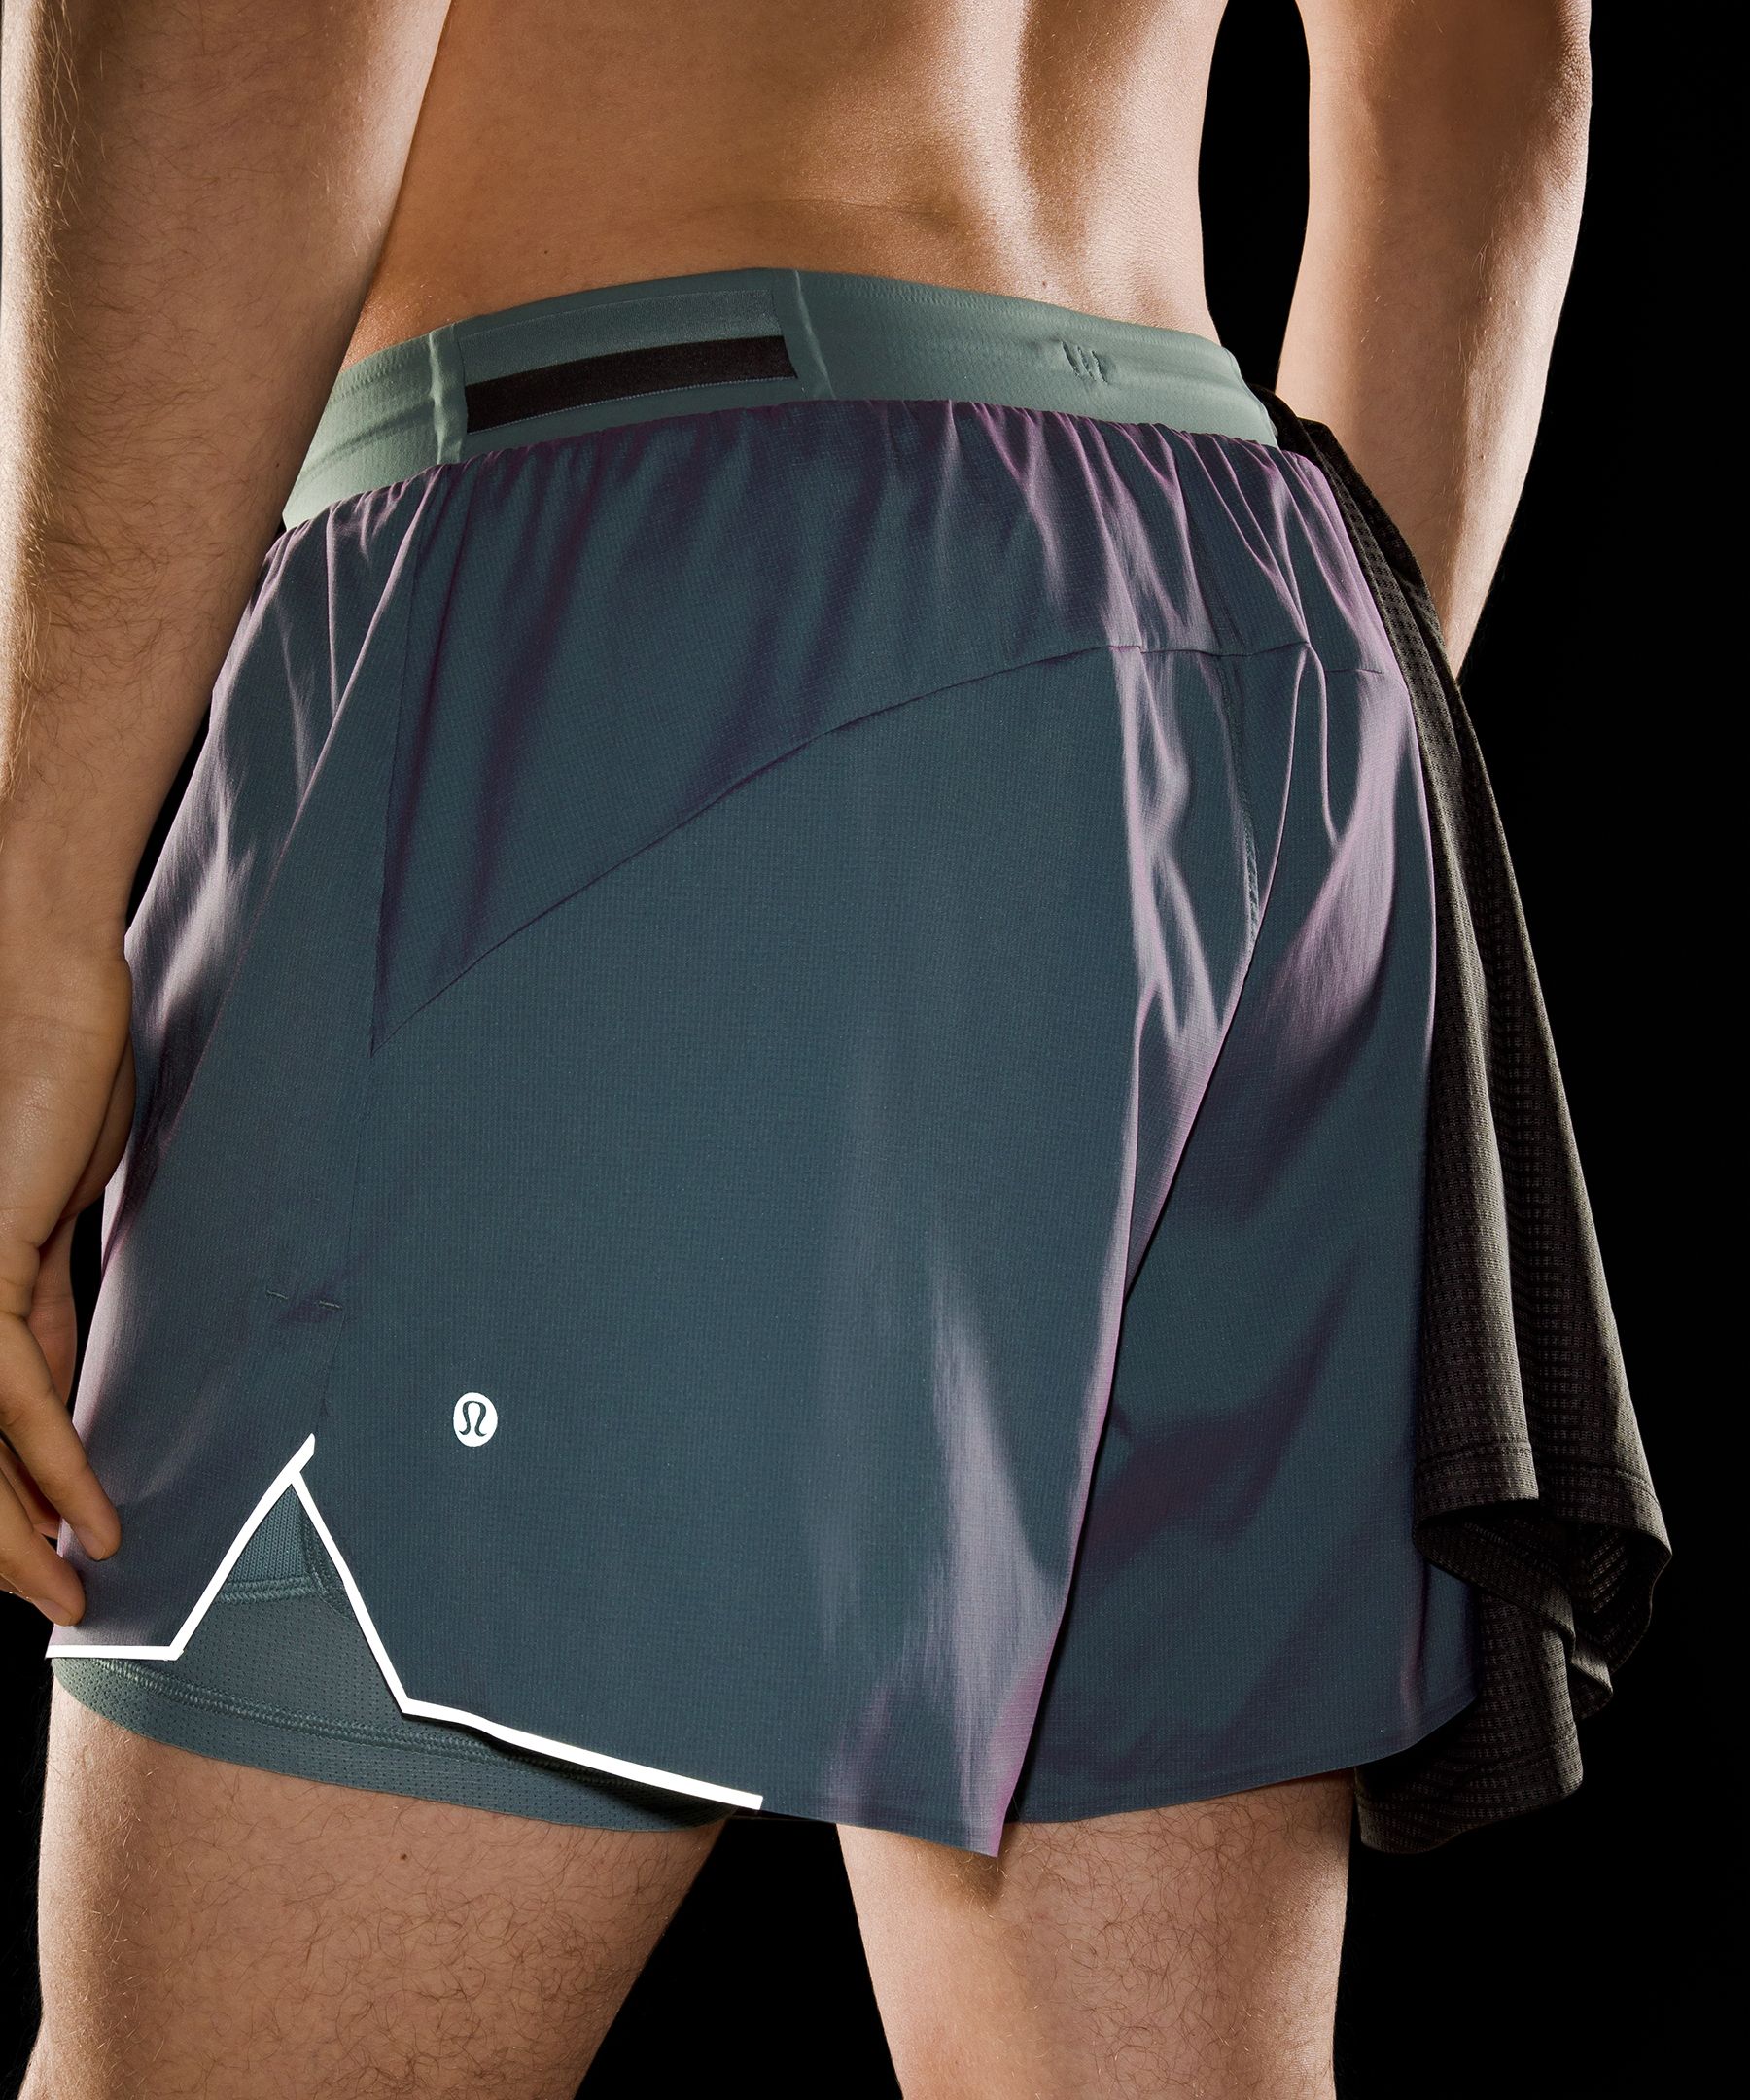 Fast and Free Lined Short 5" *Iridescent | Men's Shorts